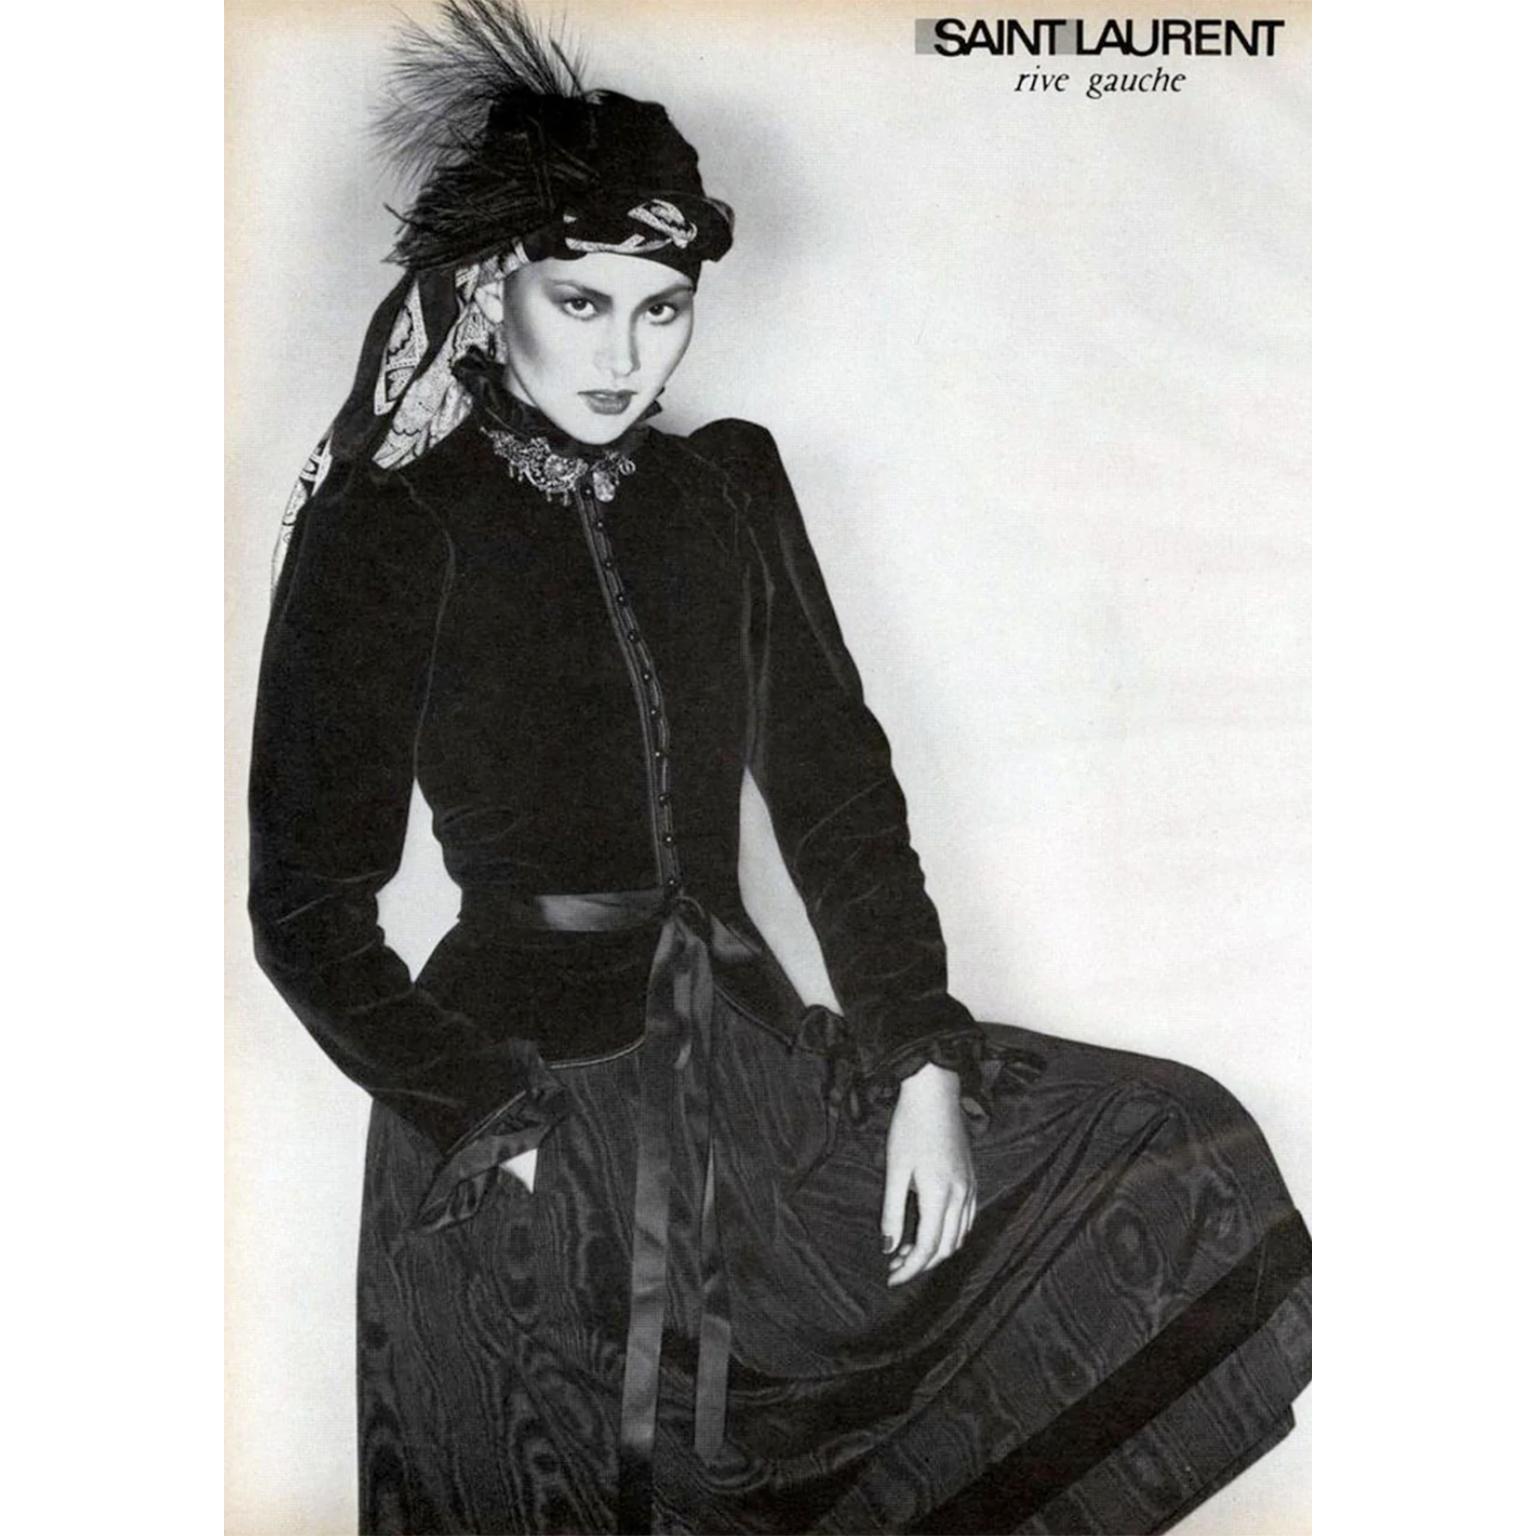 This is an iconic vintage Yves Saint Laurent chocolate brown velvet jacket with black taffeta ruffle trim from the YSL Fall/Winter 1976/77 ready to wear collection which was inspired by the Yves Saint Laurent Haute Couture Russian 